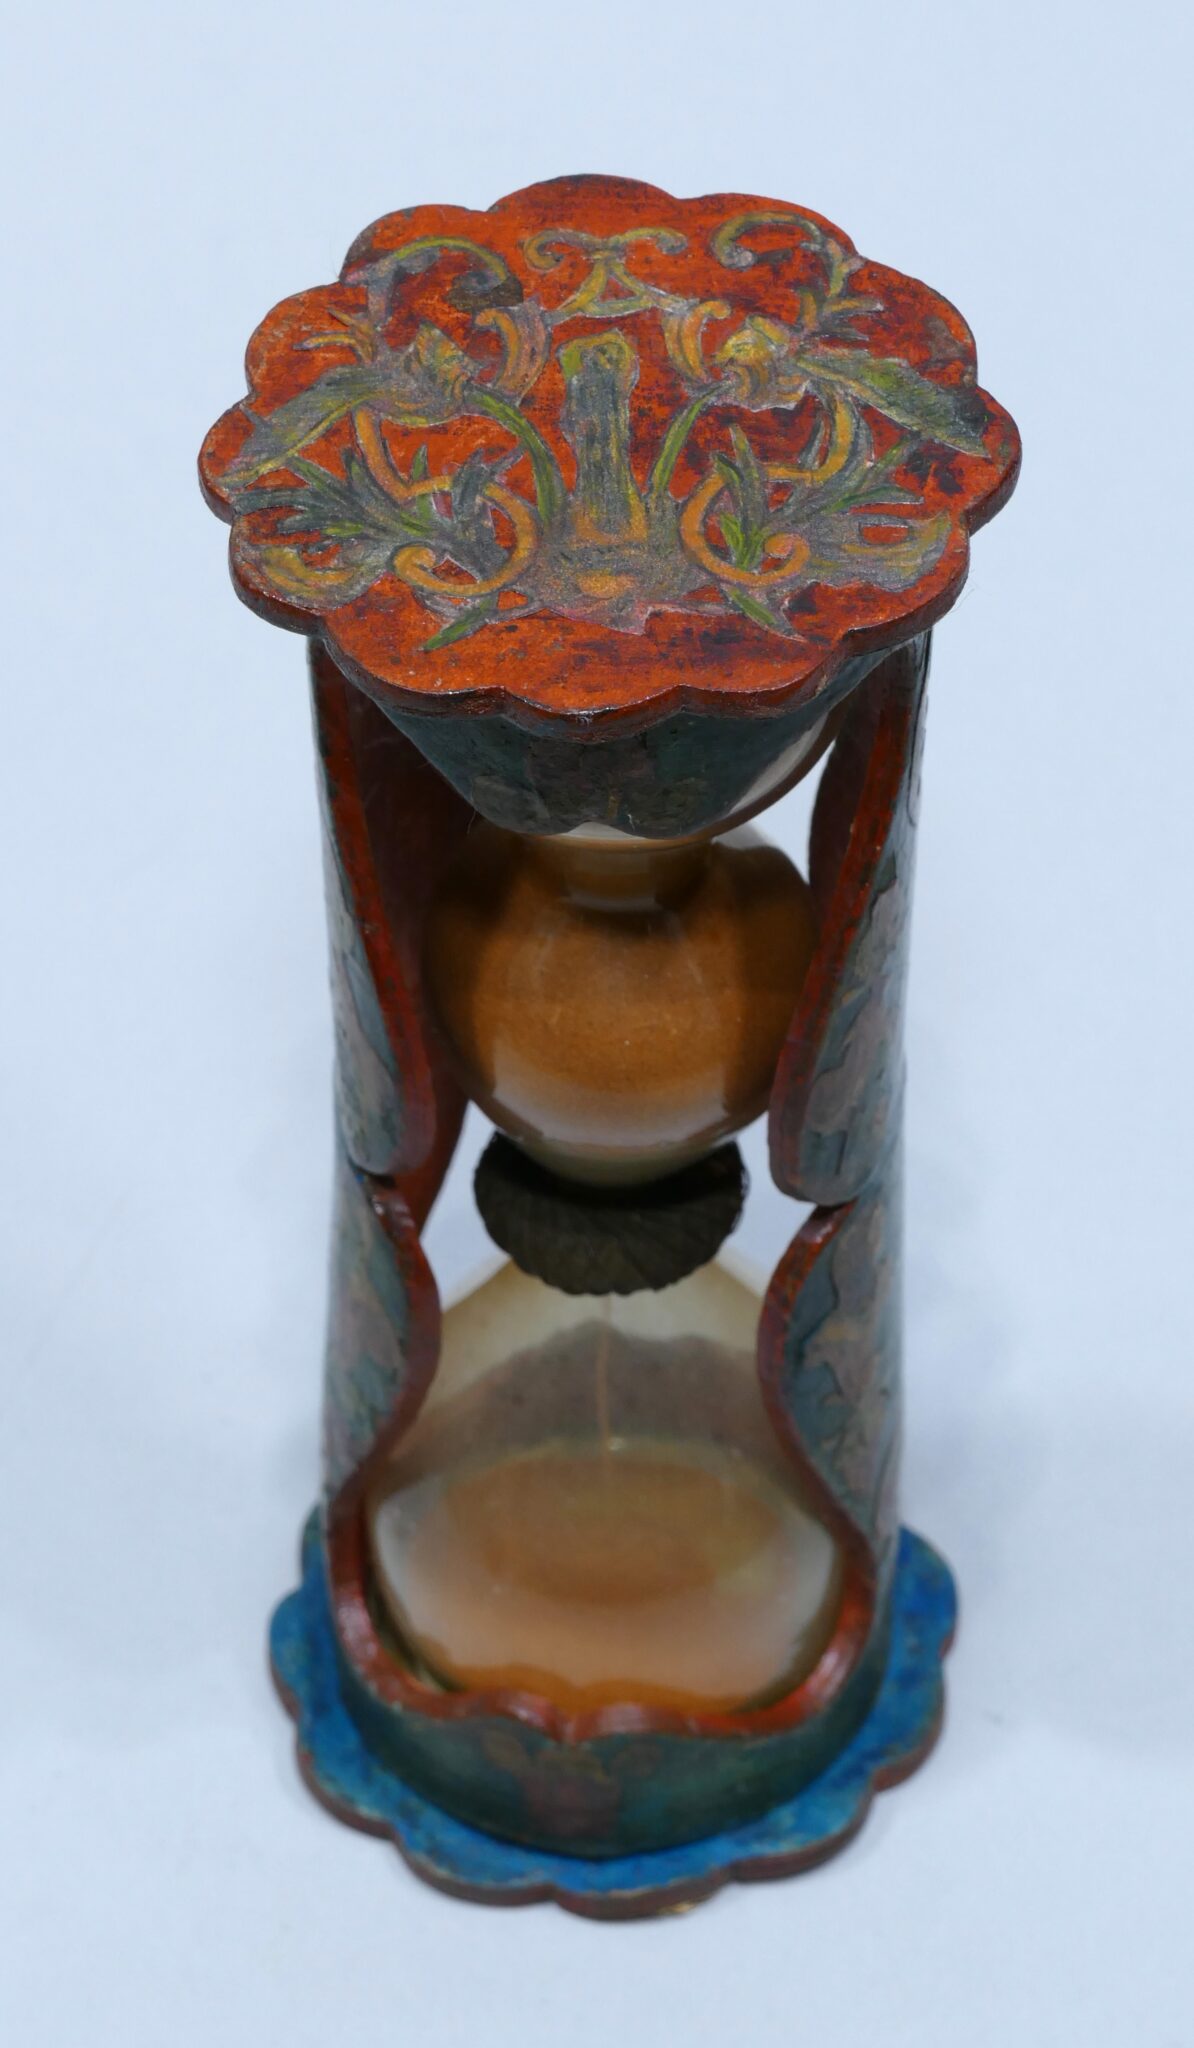 18th century hourglass made in Arte Povera with floral decoration